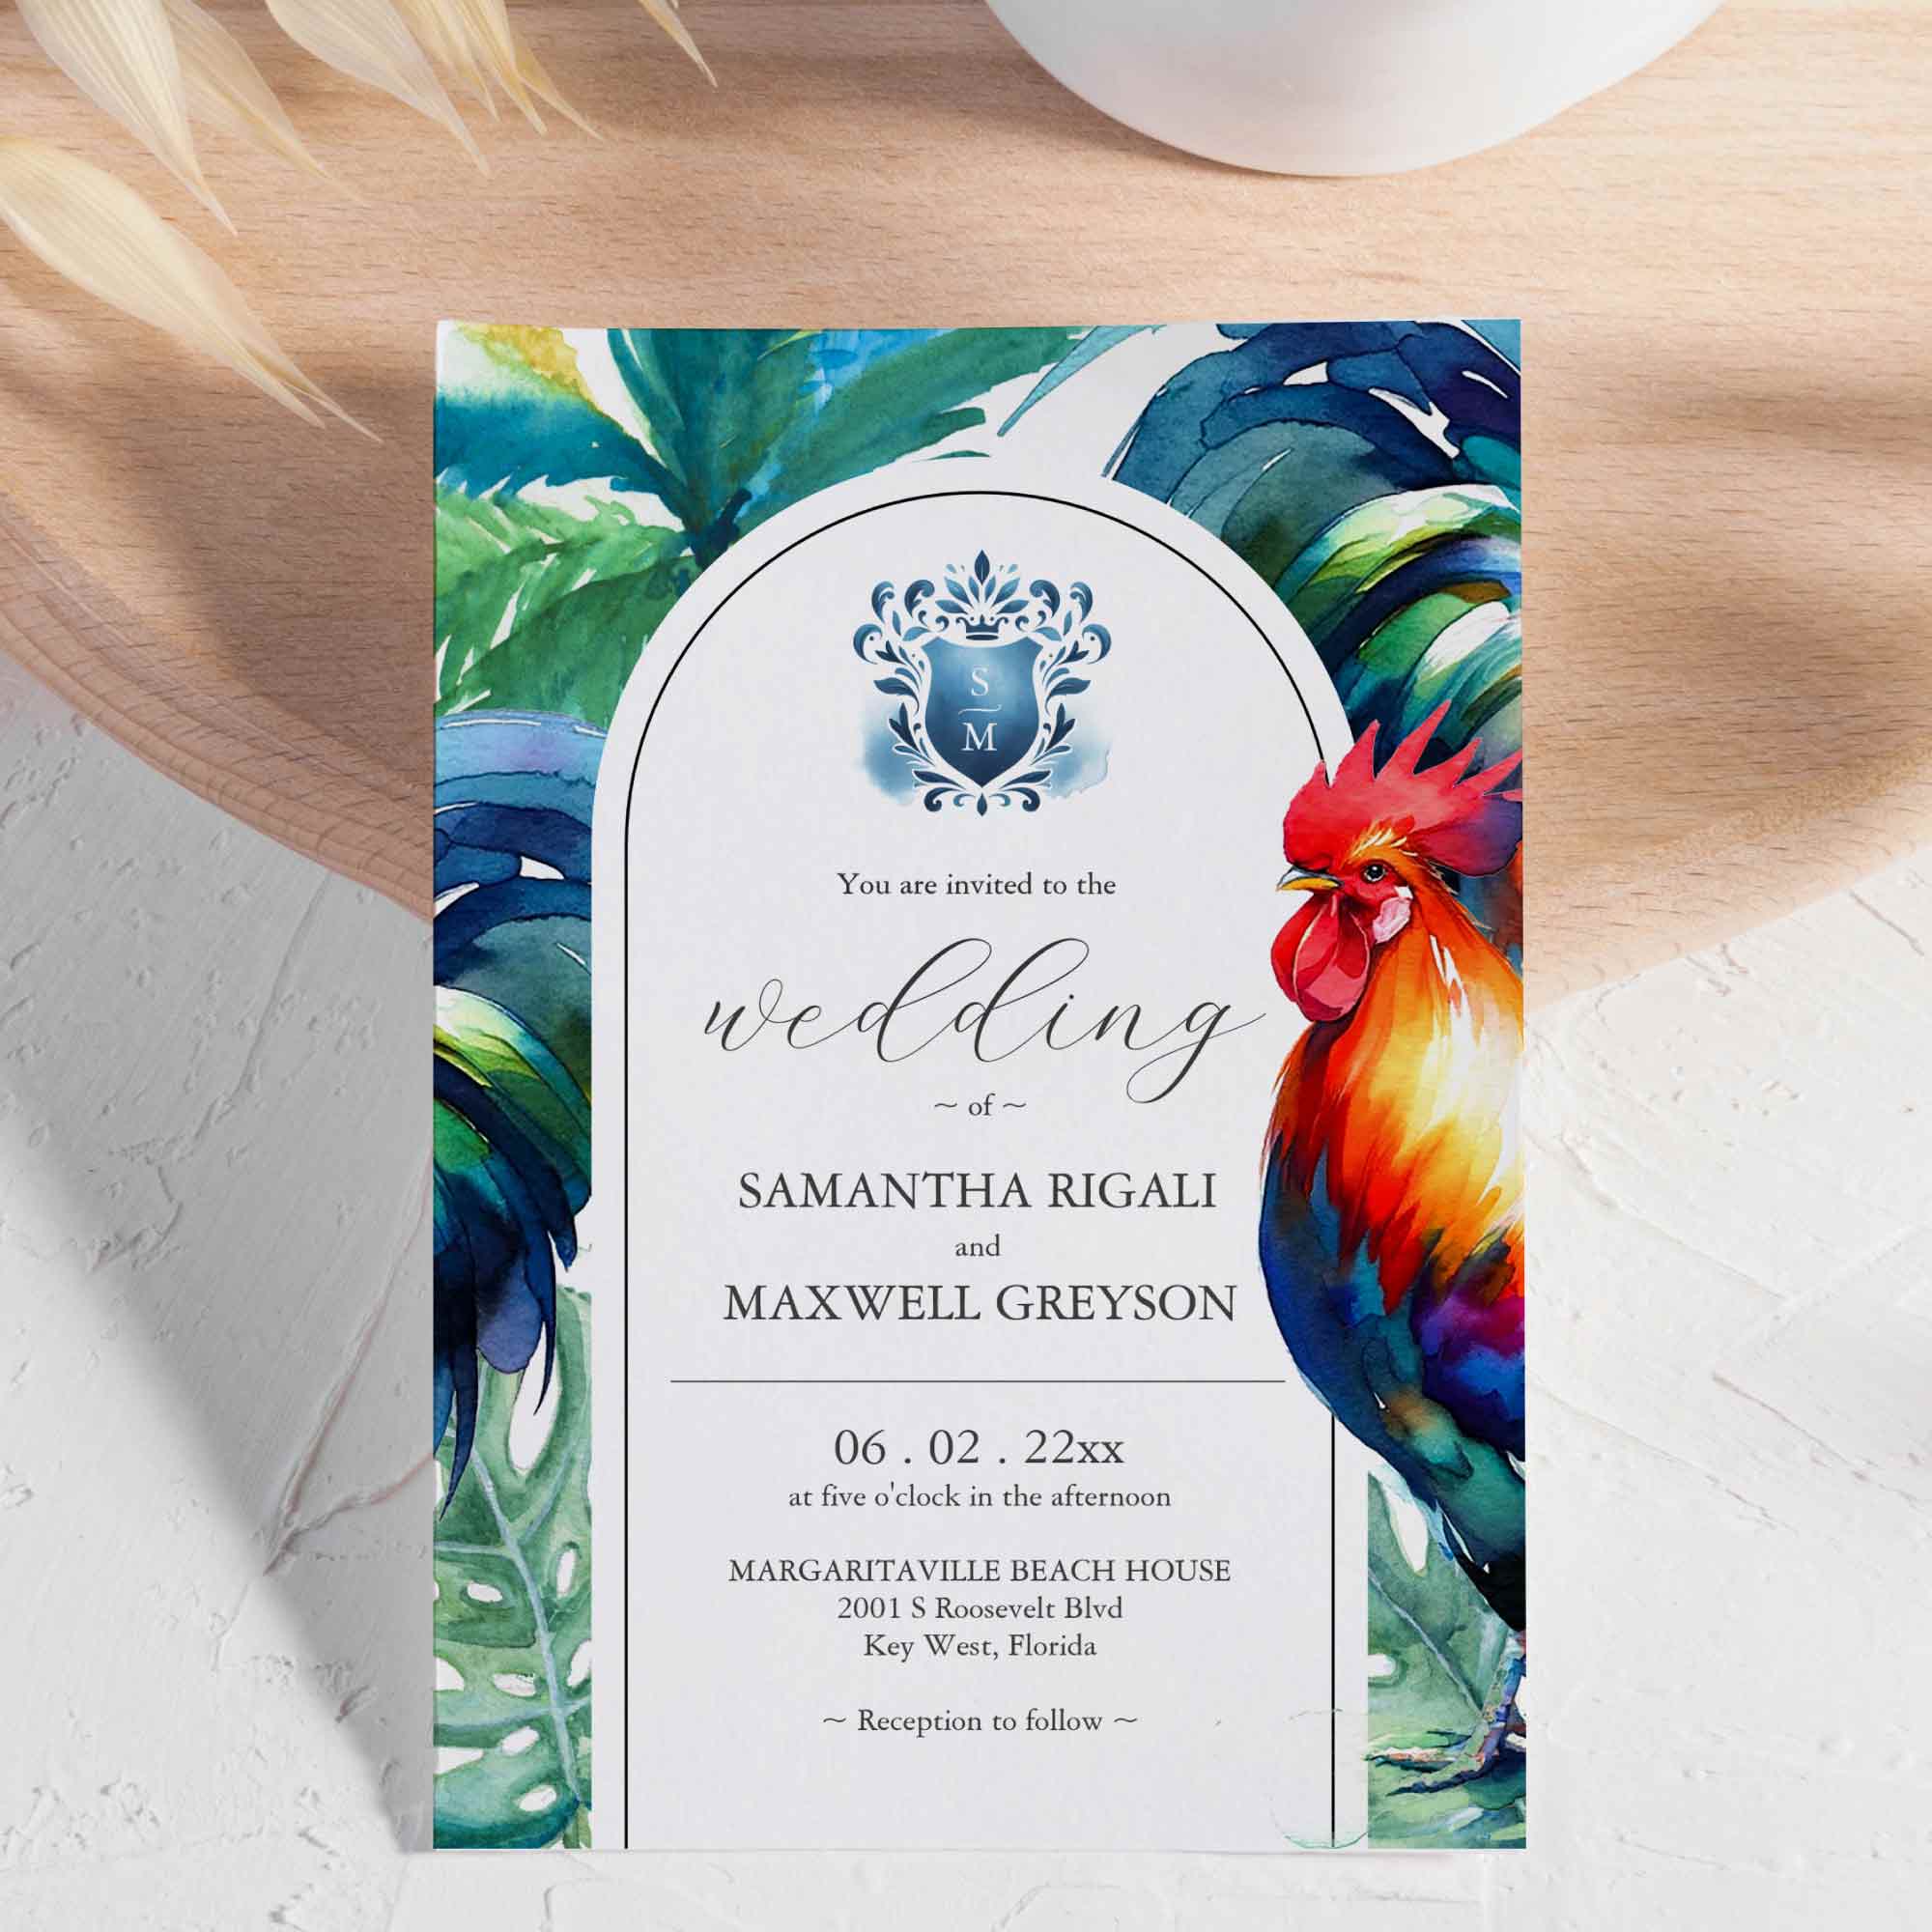 Destination Florida wedding invitations by Victoria Grigaliunas of Do Tell A Belle on Zazzle